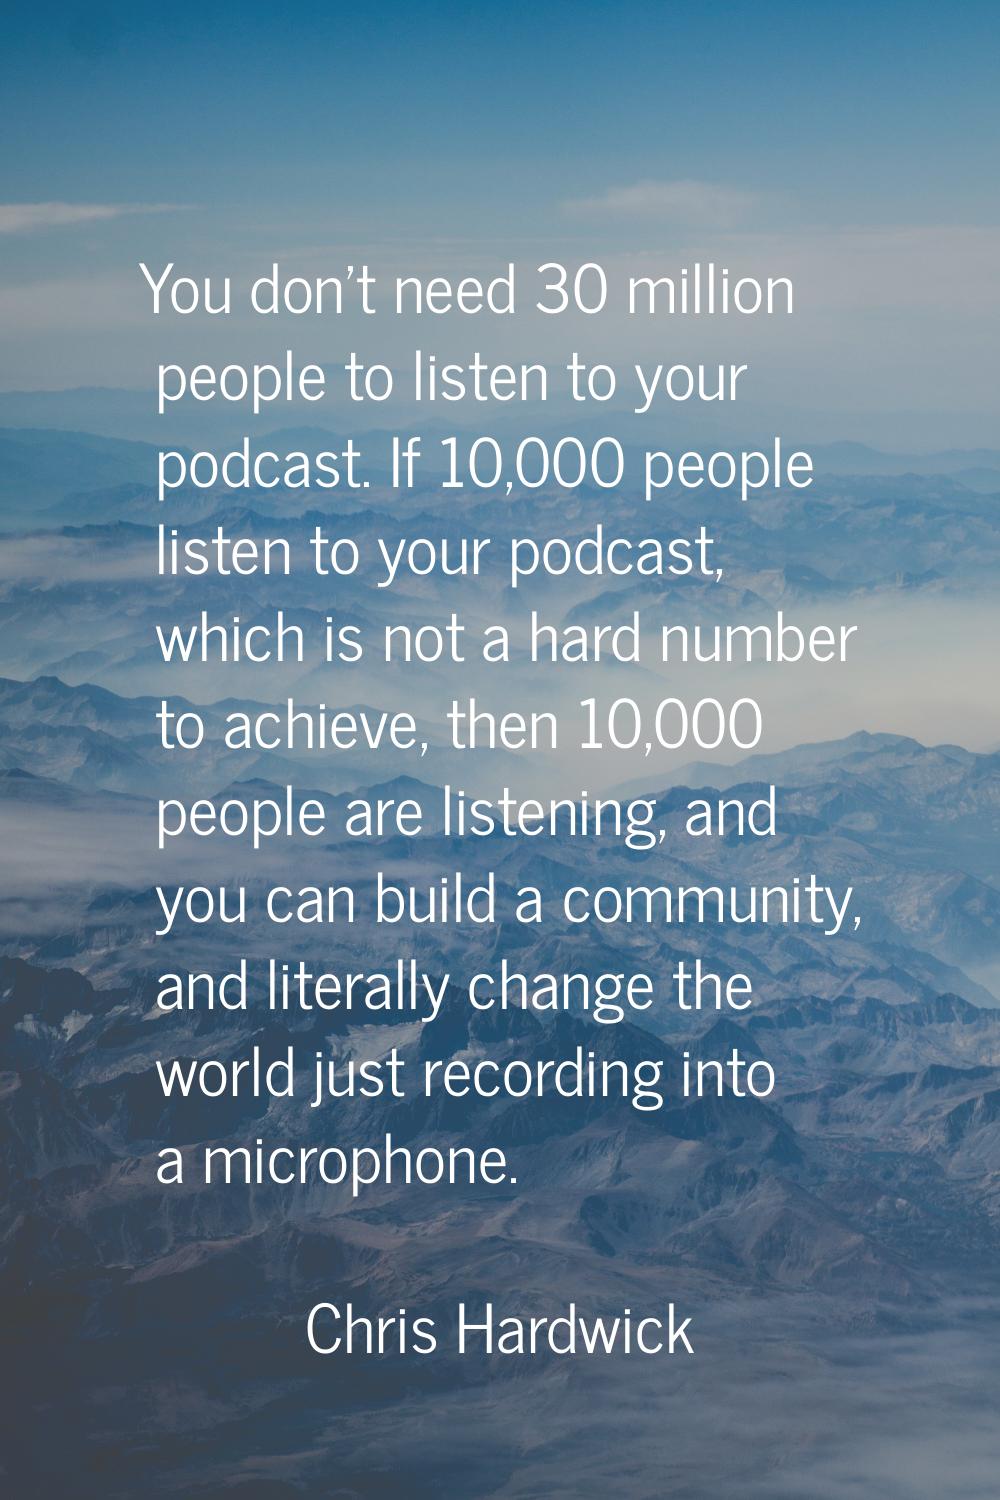 You don't need 30 million people to listen to your podcast. If 10,000 people listen to your podcast